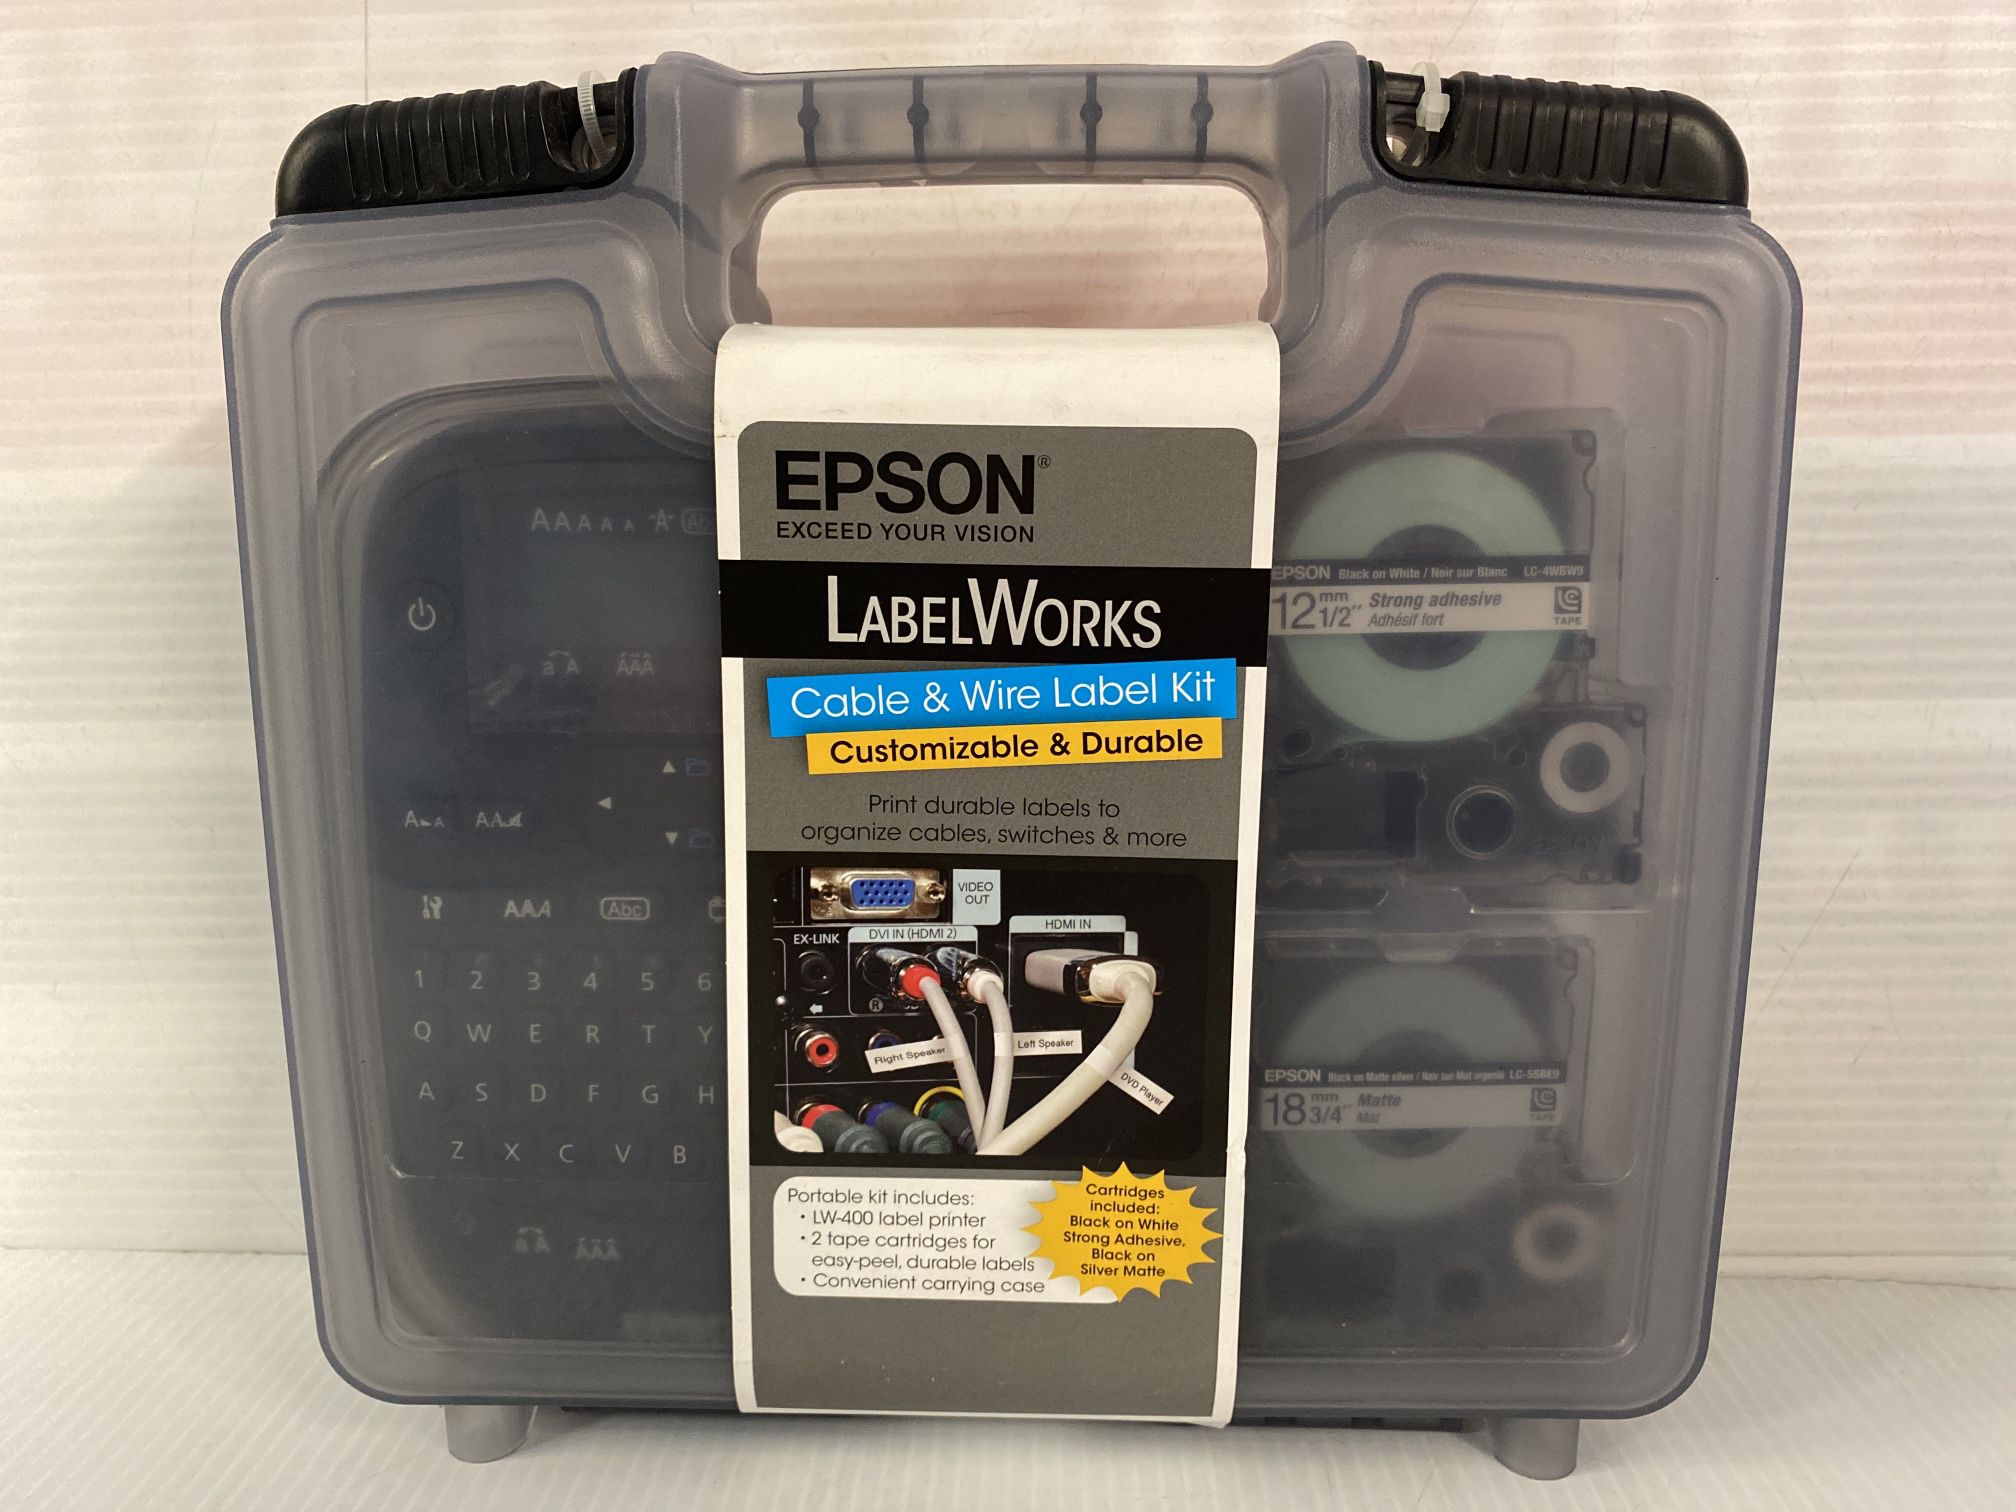 C51CB70190 Epson LabelWorks Cable & Wire Label Kit 